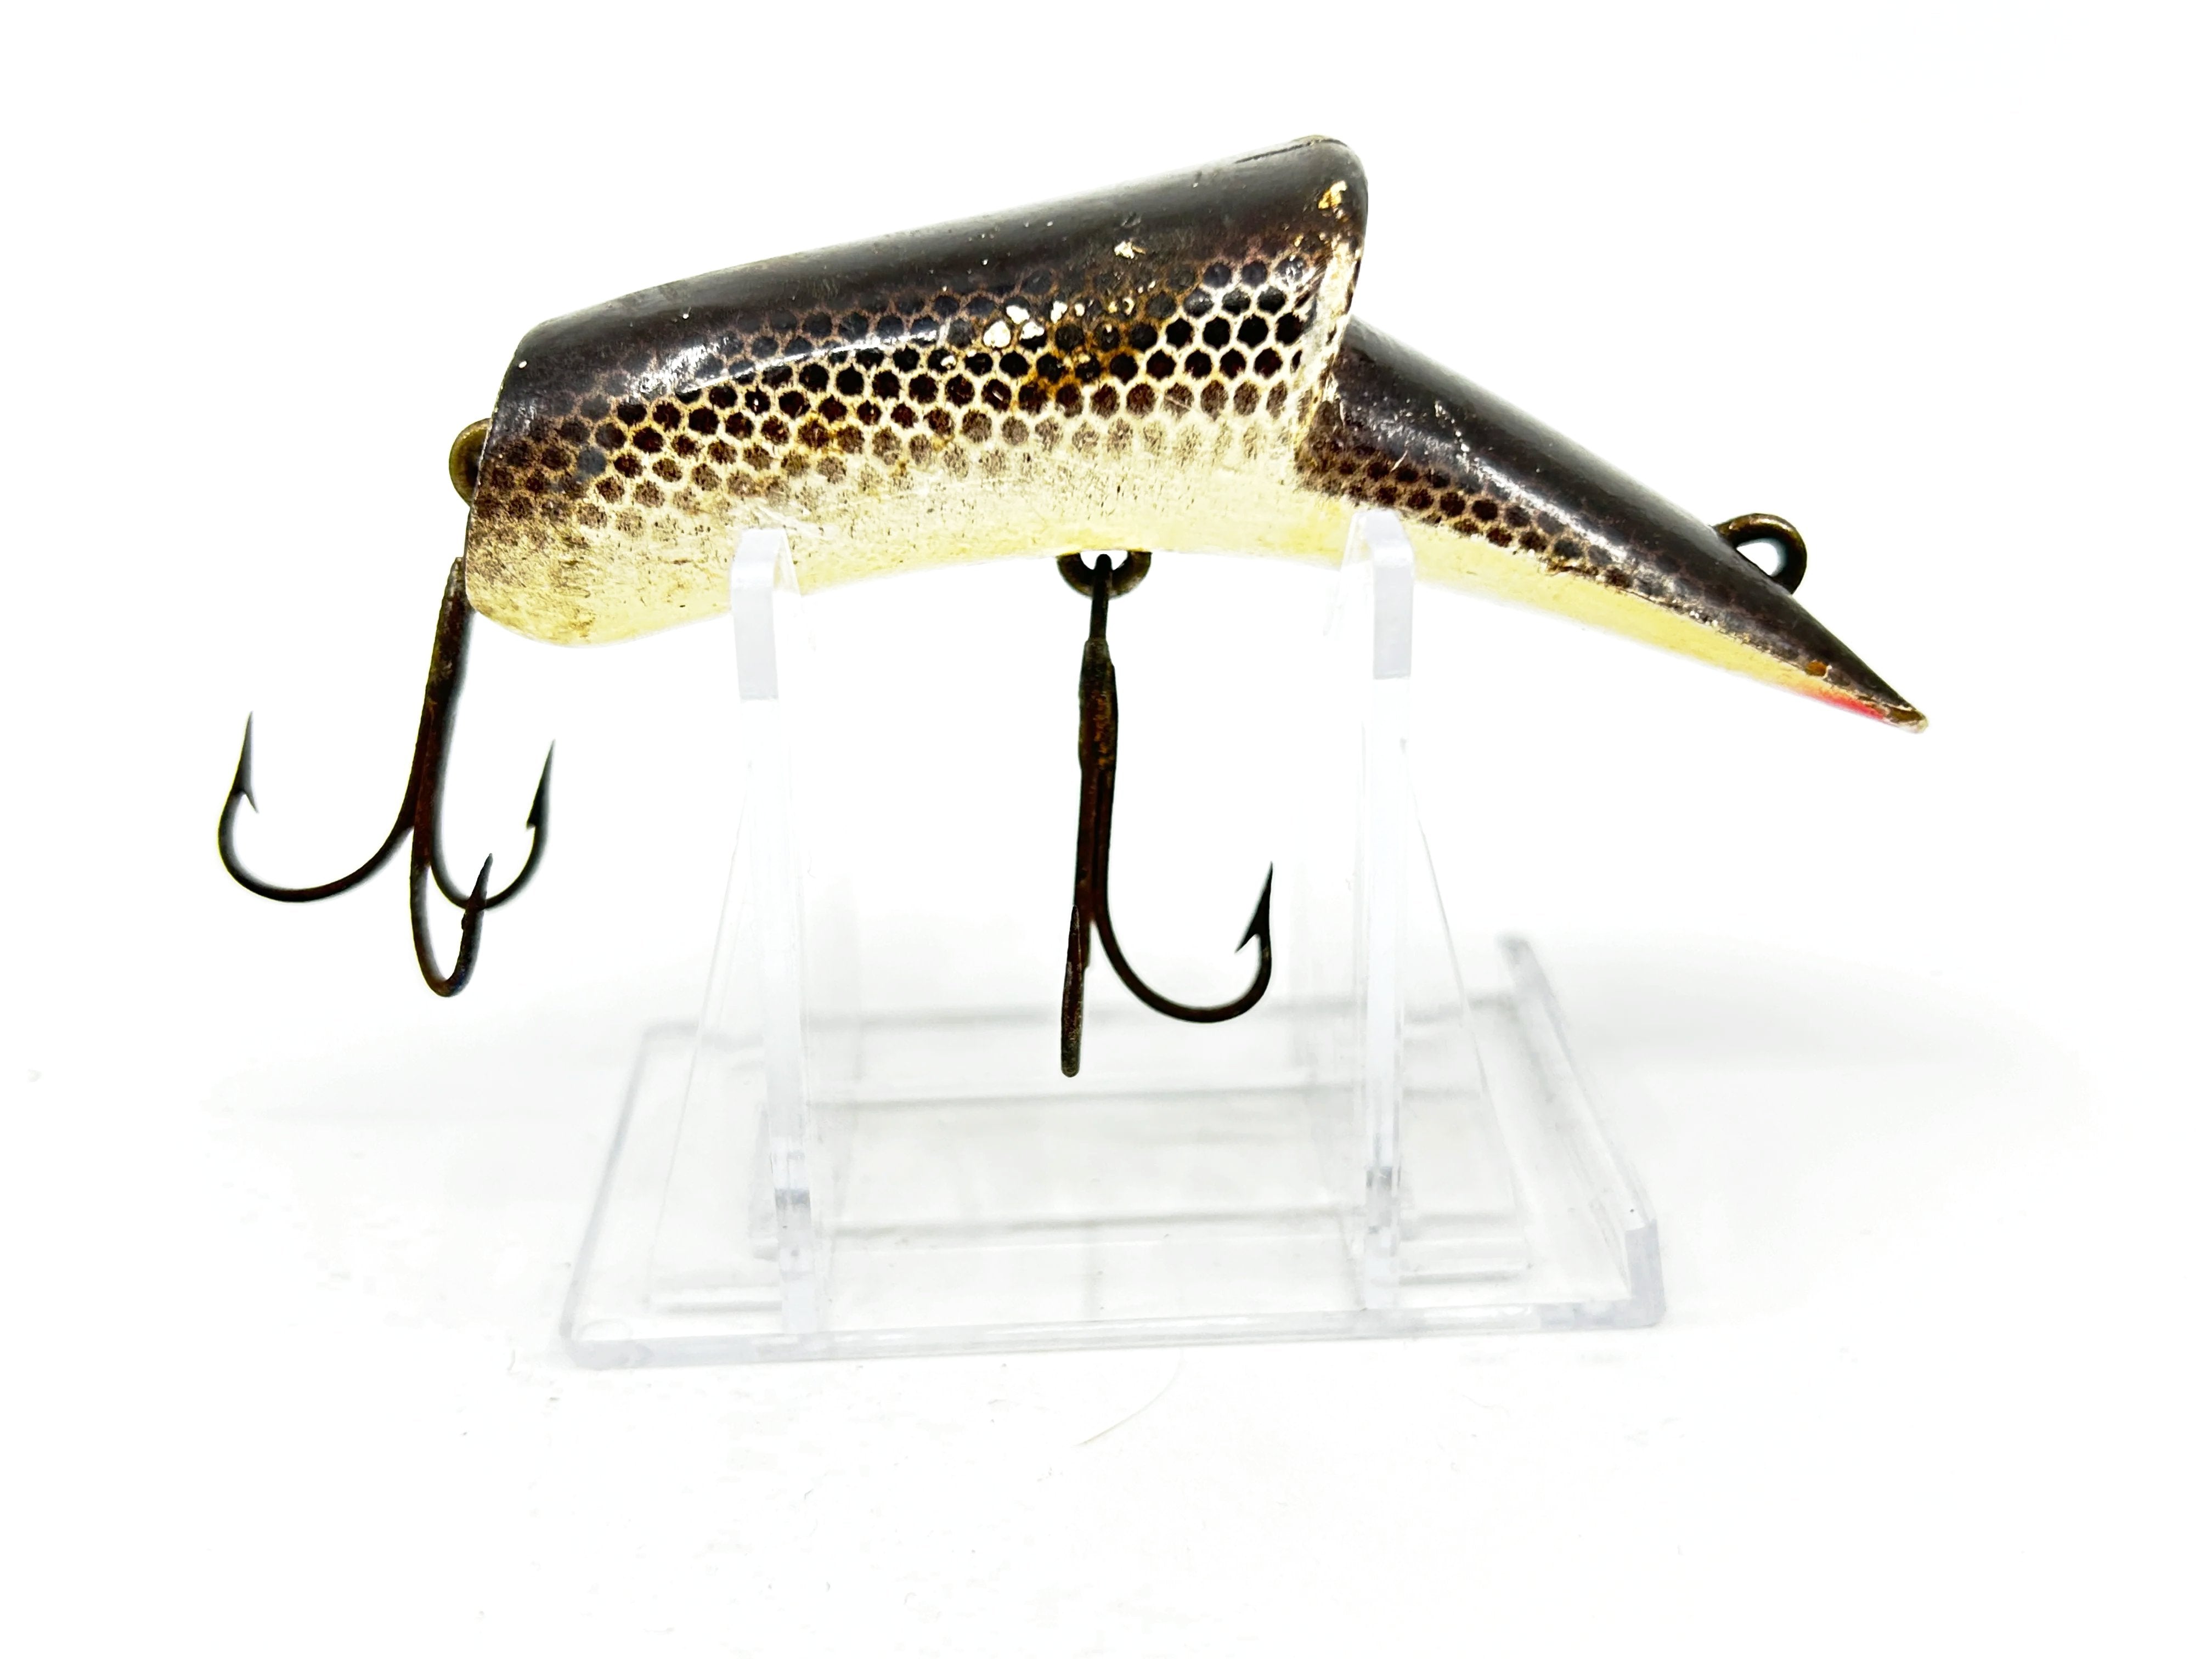 3-1/2 Wooden Kautzky Lazy Ike Fishing Lure (HOT COLOR) 7/23